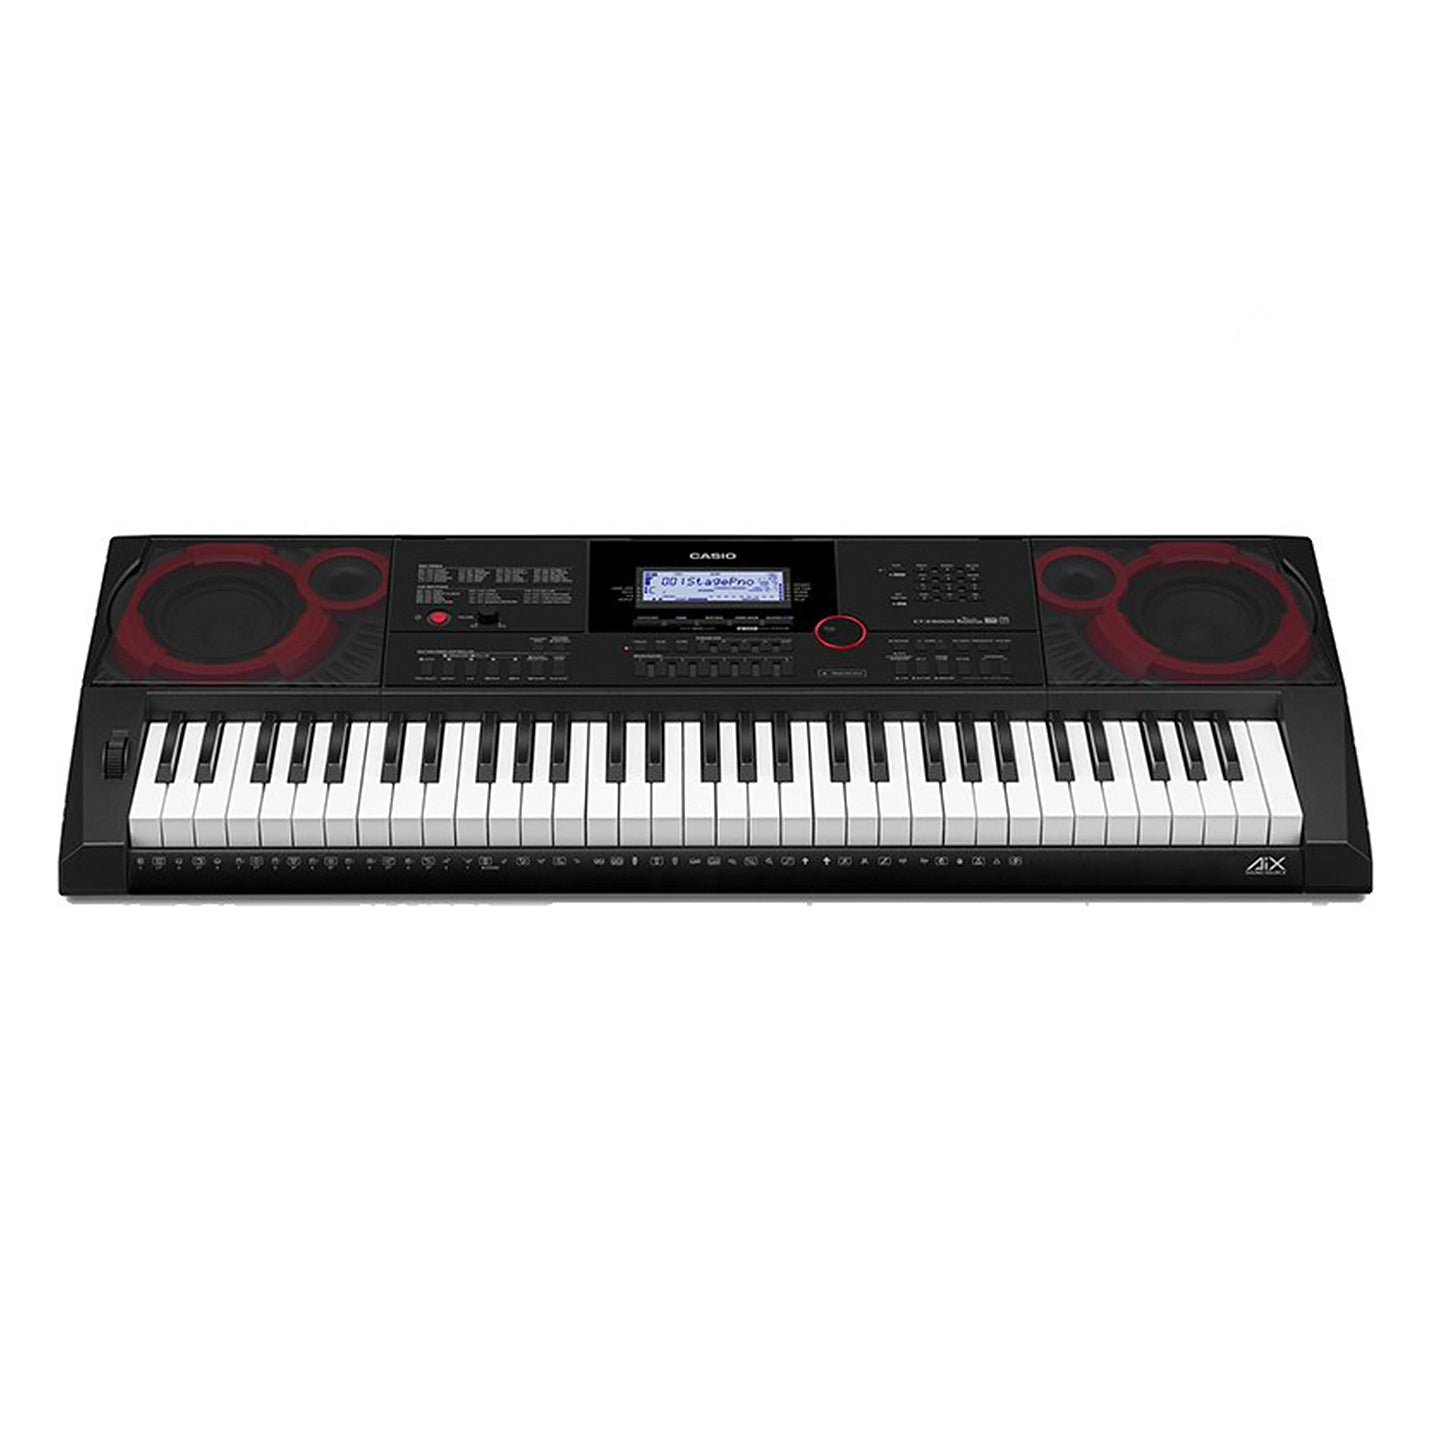 Casio CT-X3000 61 Key Touch Response Portable Piano Keyboard with MIDI recorder, Channel Mixer, User-Created Rhythms, Data Manager Software for Performance, Songwriting, and Editing